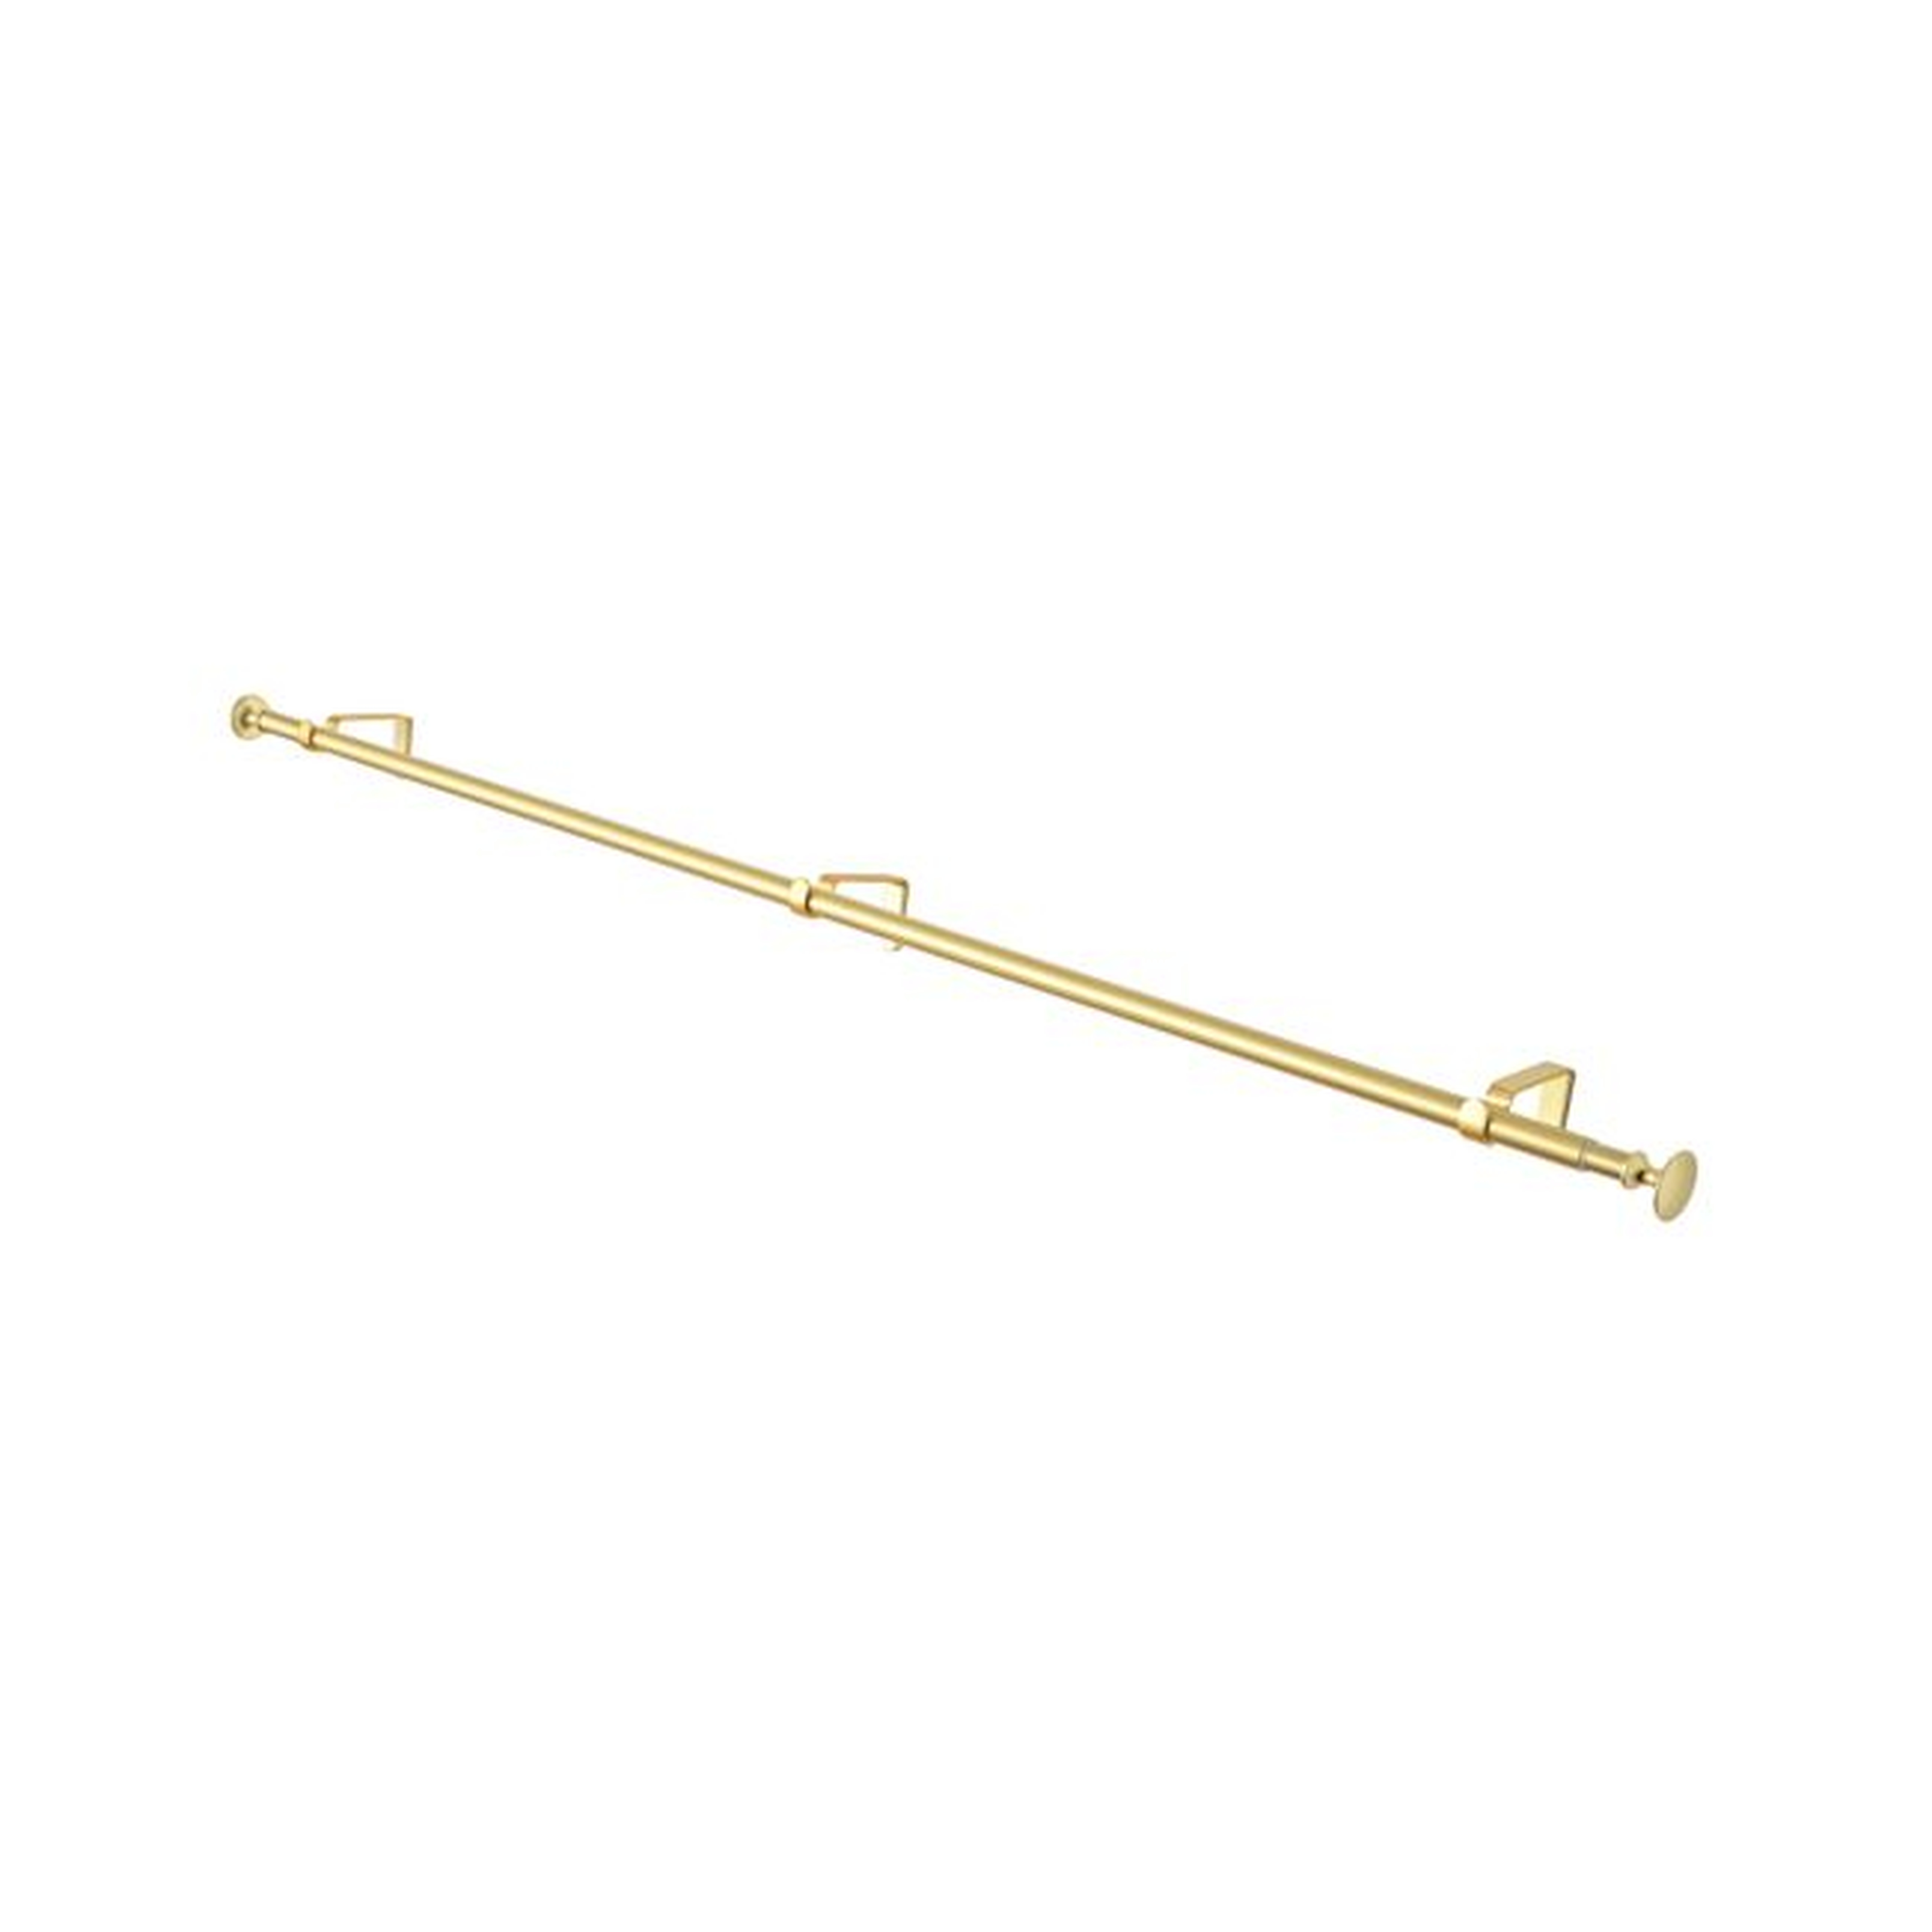 Single Gold 48-88" Curtain Rod - Crate and Barrel